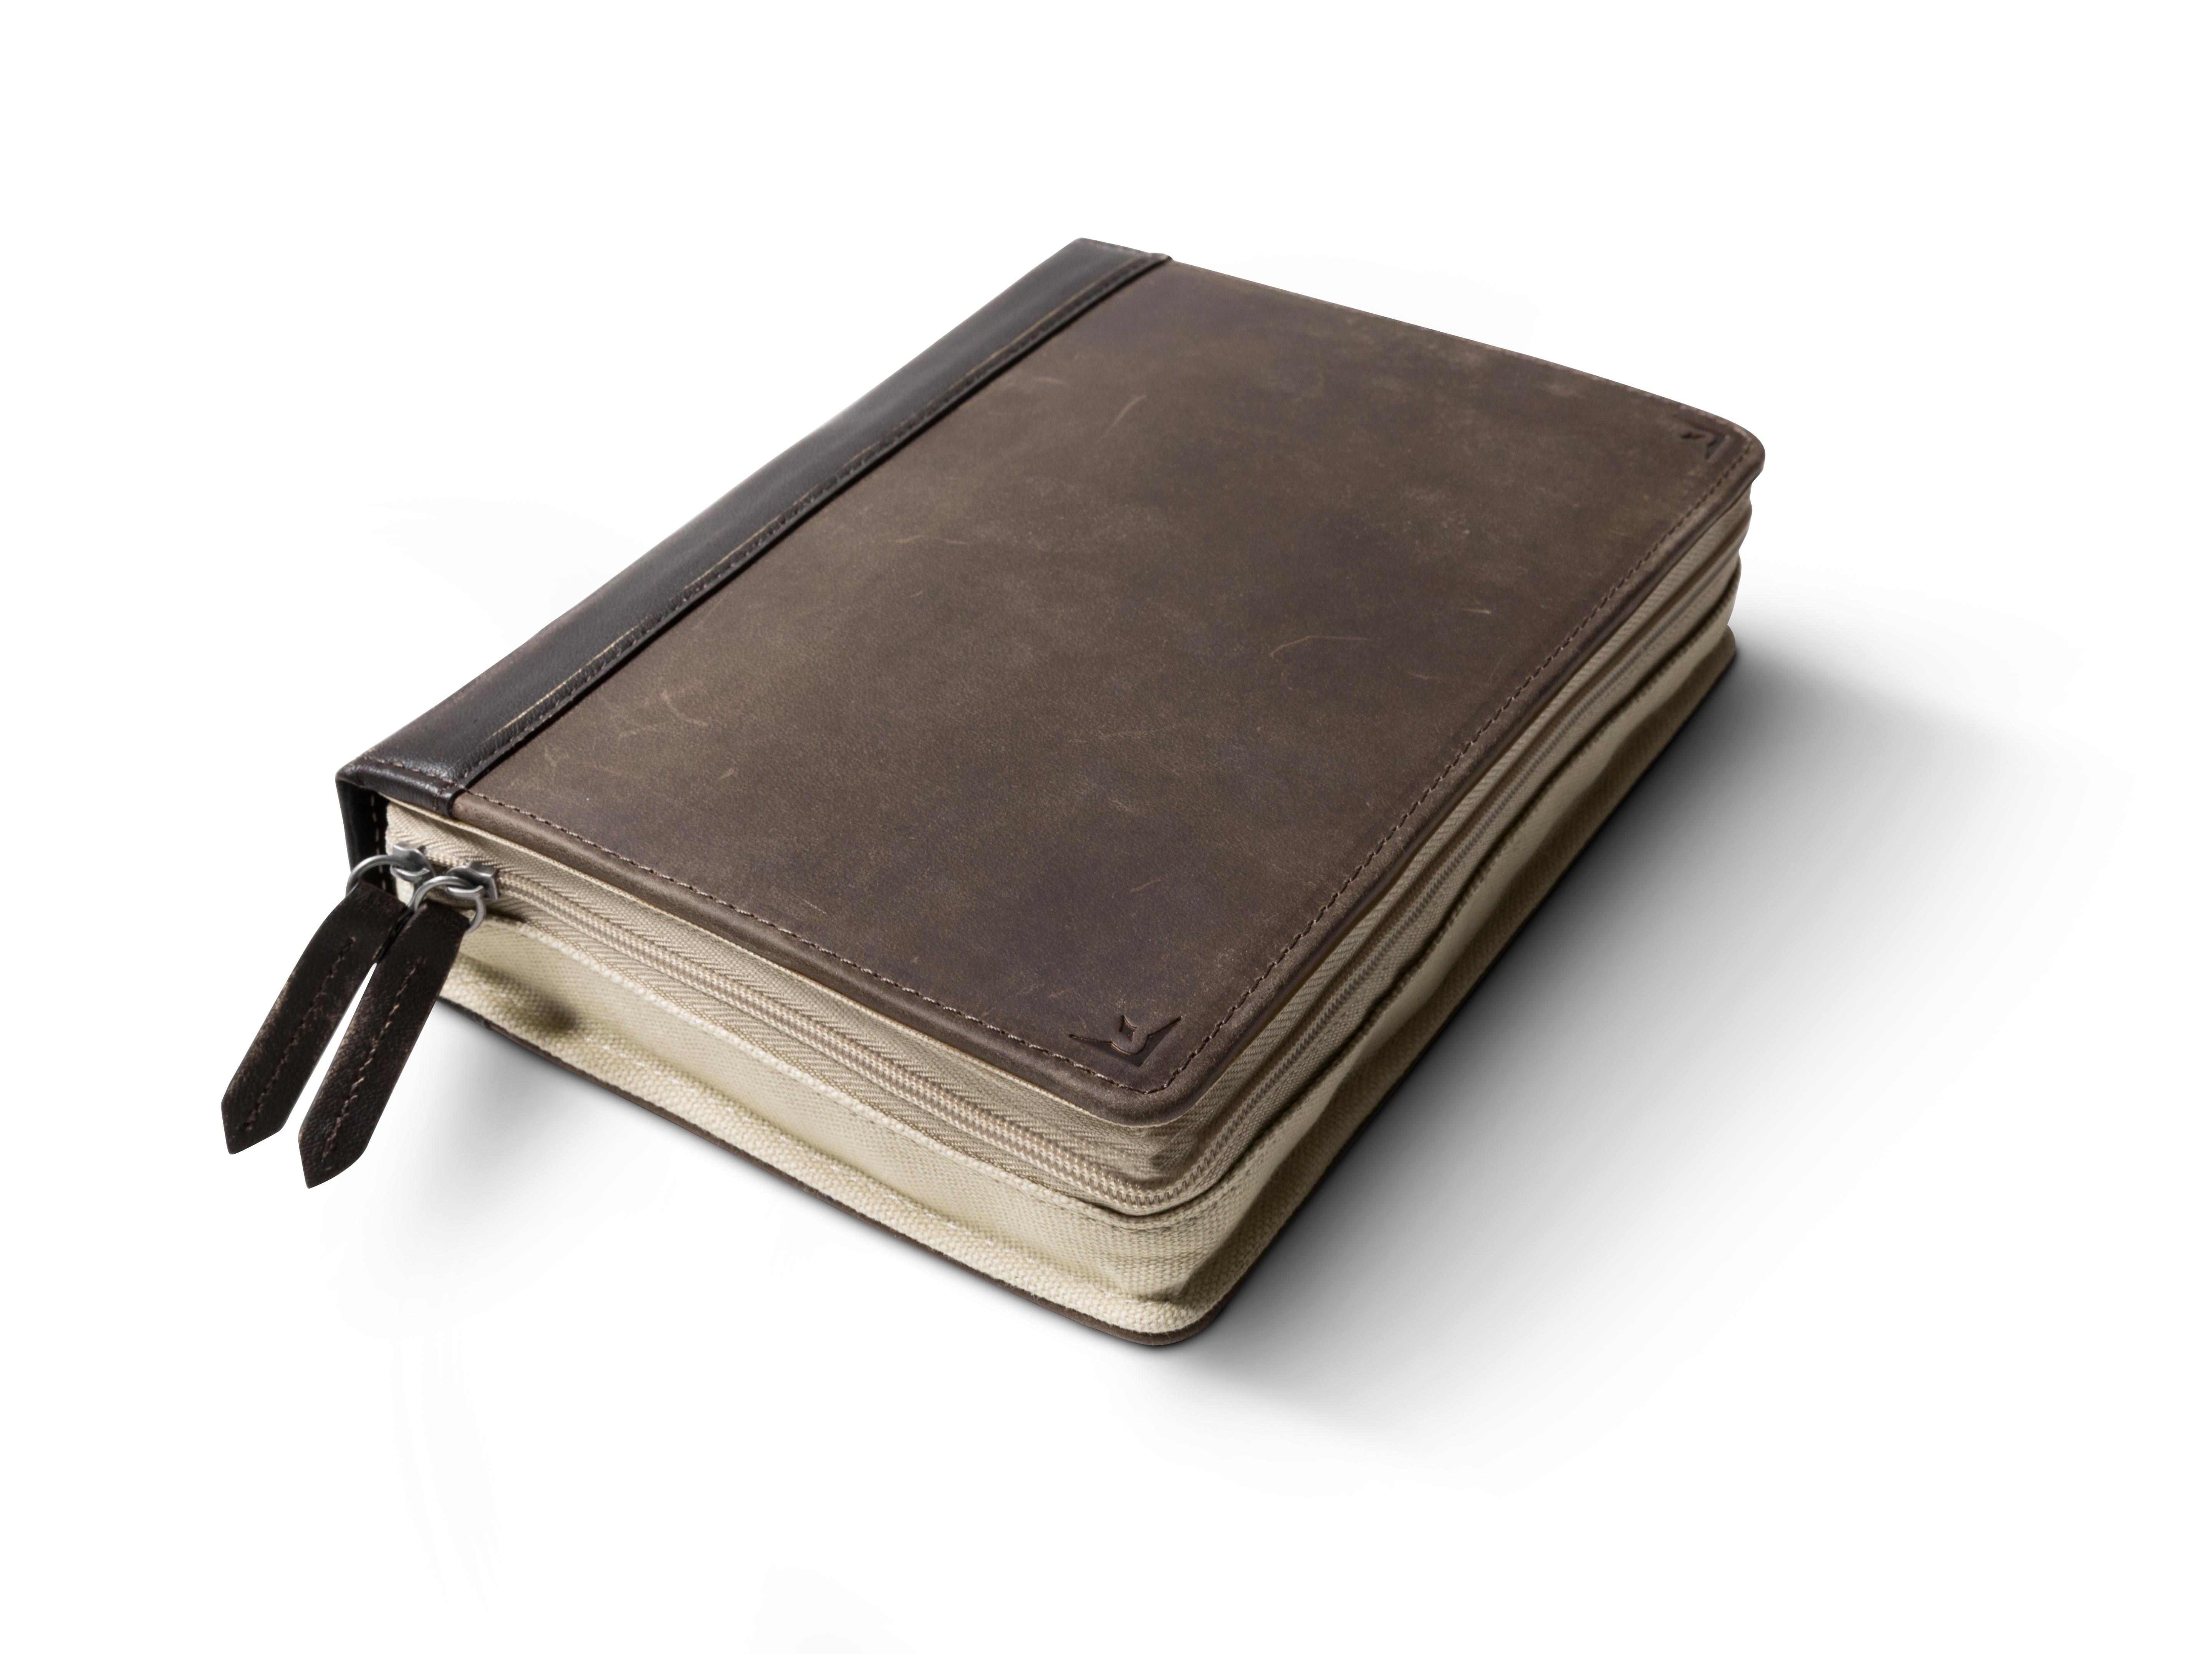 Twelve South BookBook CaddySack - Travel folder for adapters, power adapters, cables and all kinds of accessories